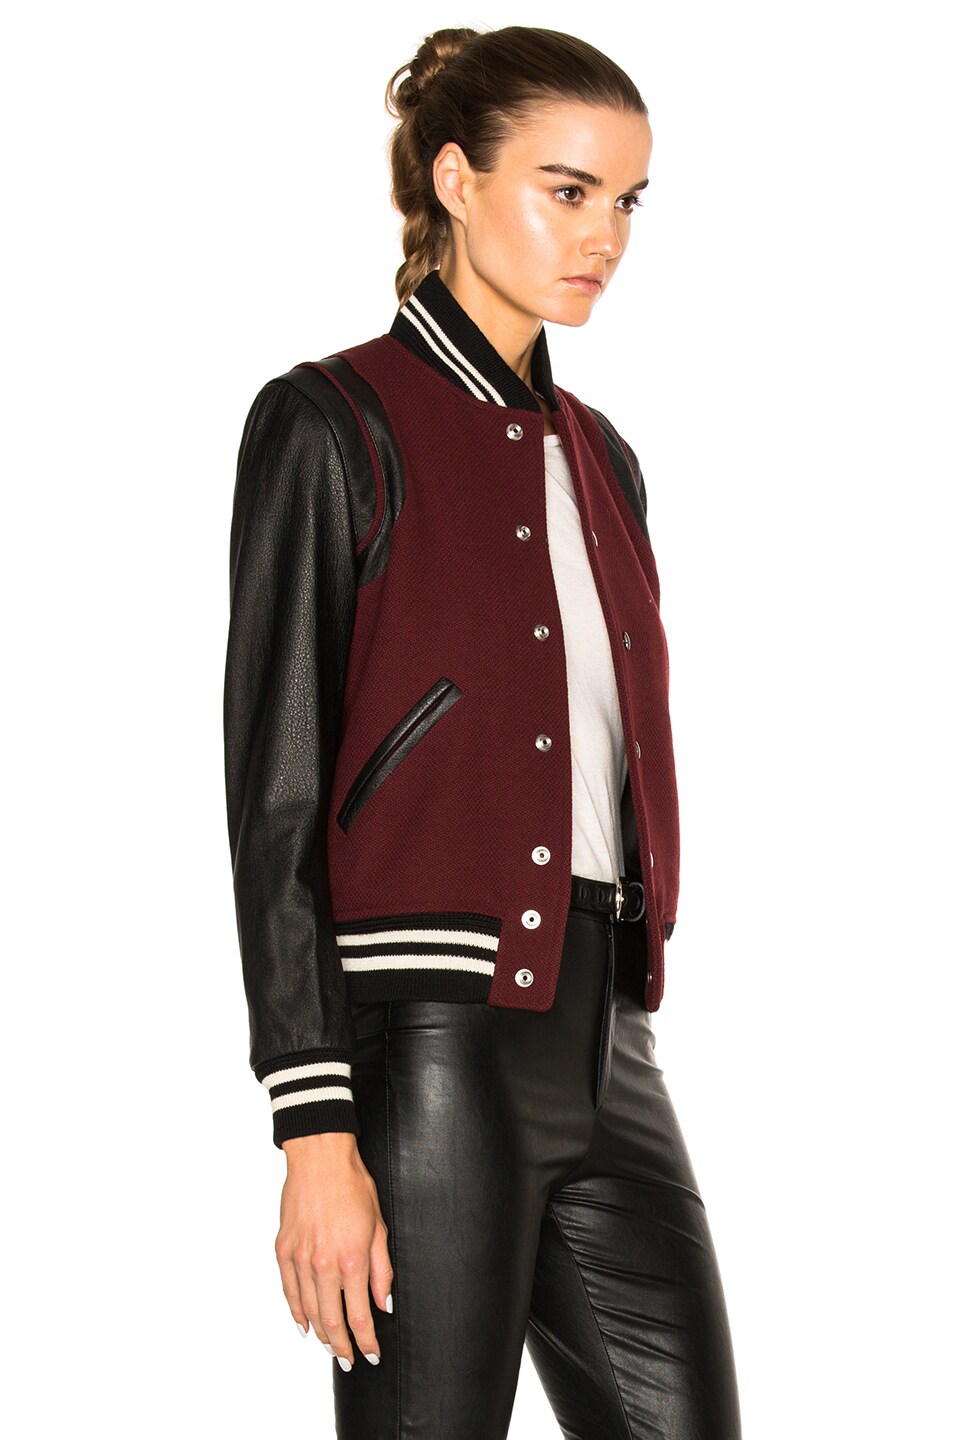 SAINT LAURENT Classic Teddy Jacket In Bordeaux Virgin Wool, Leather And ...